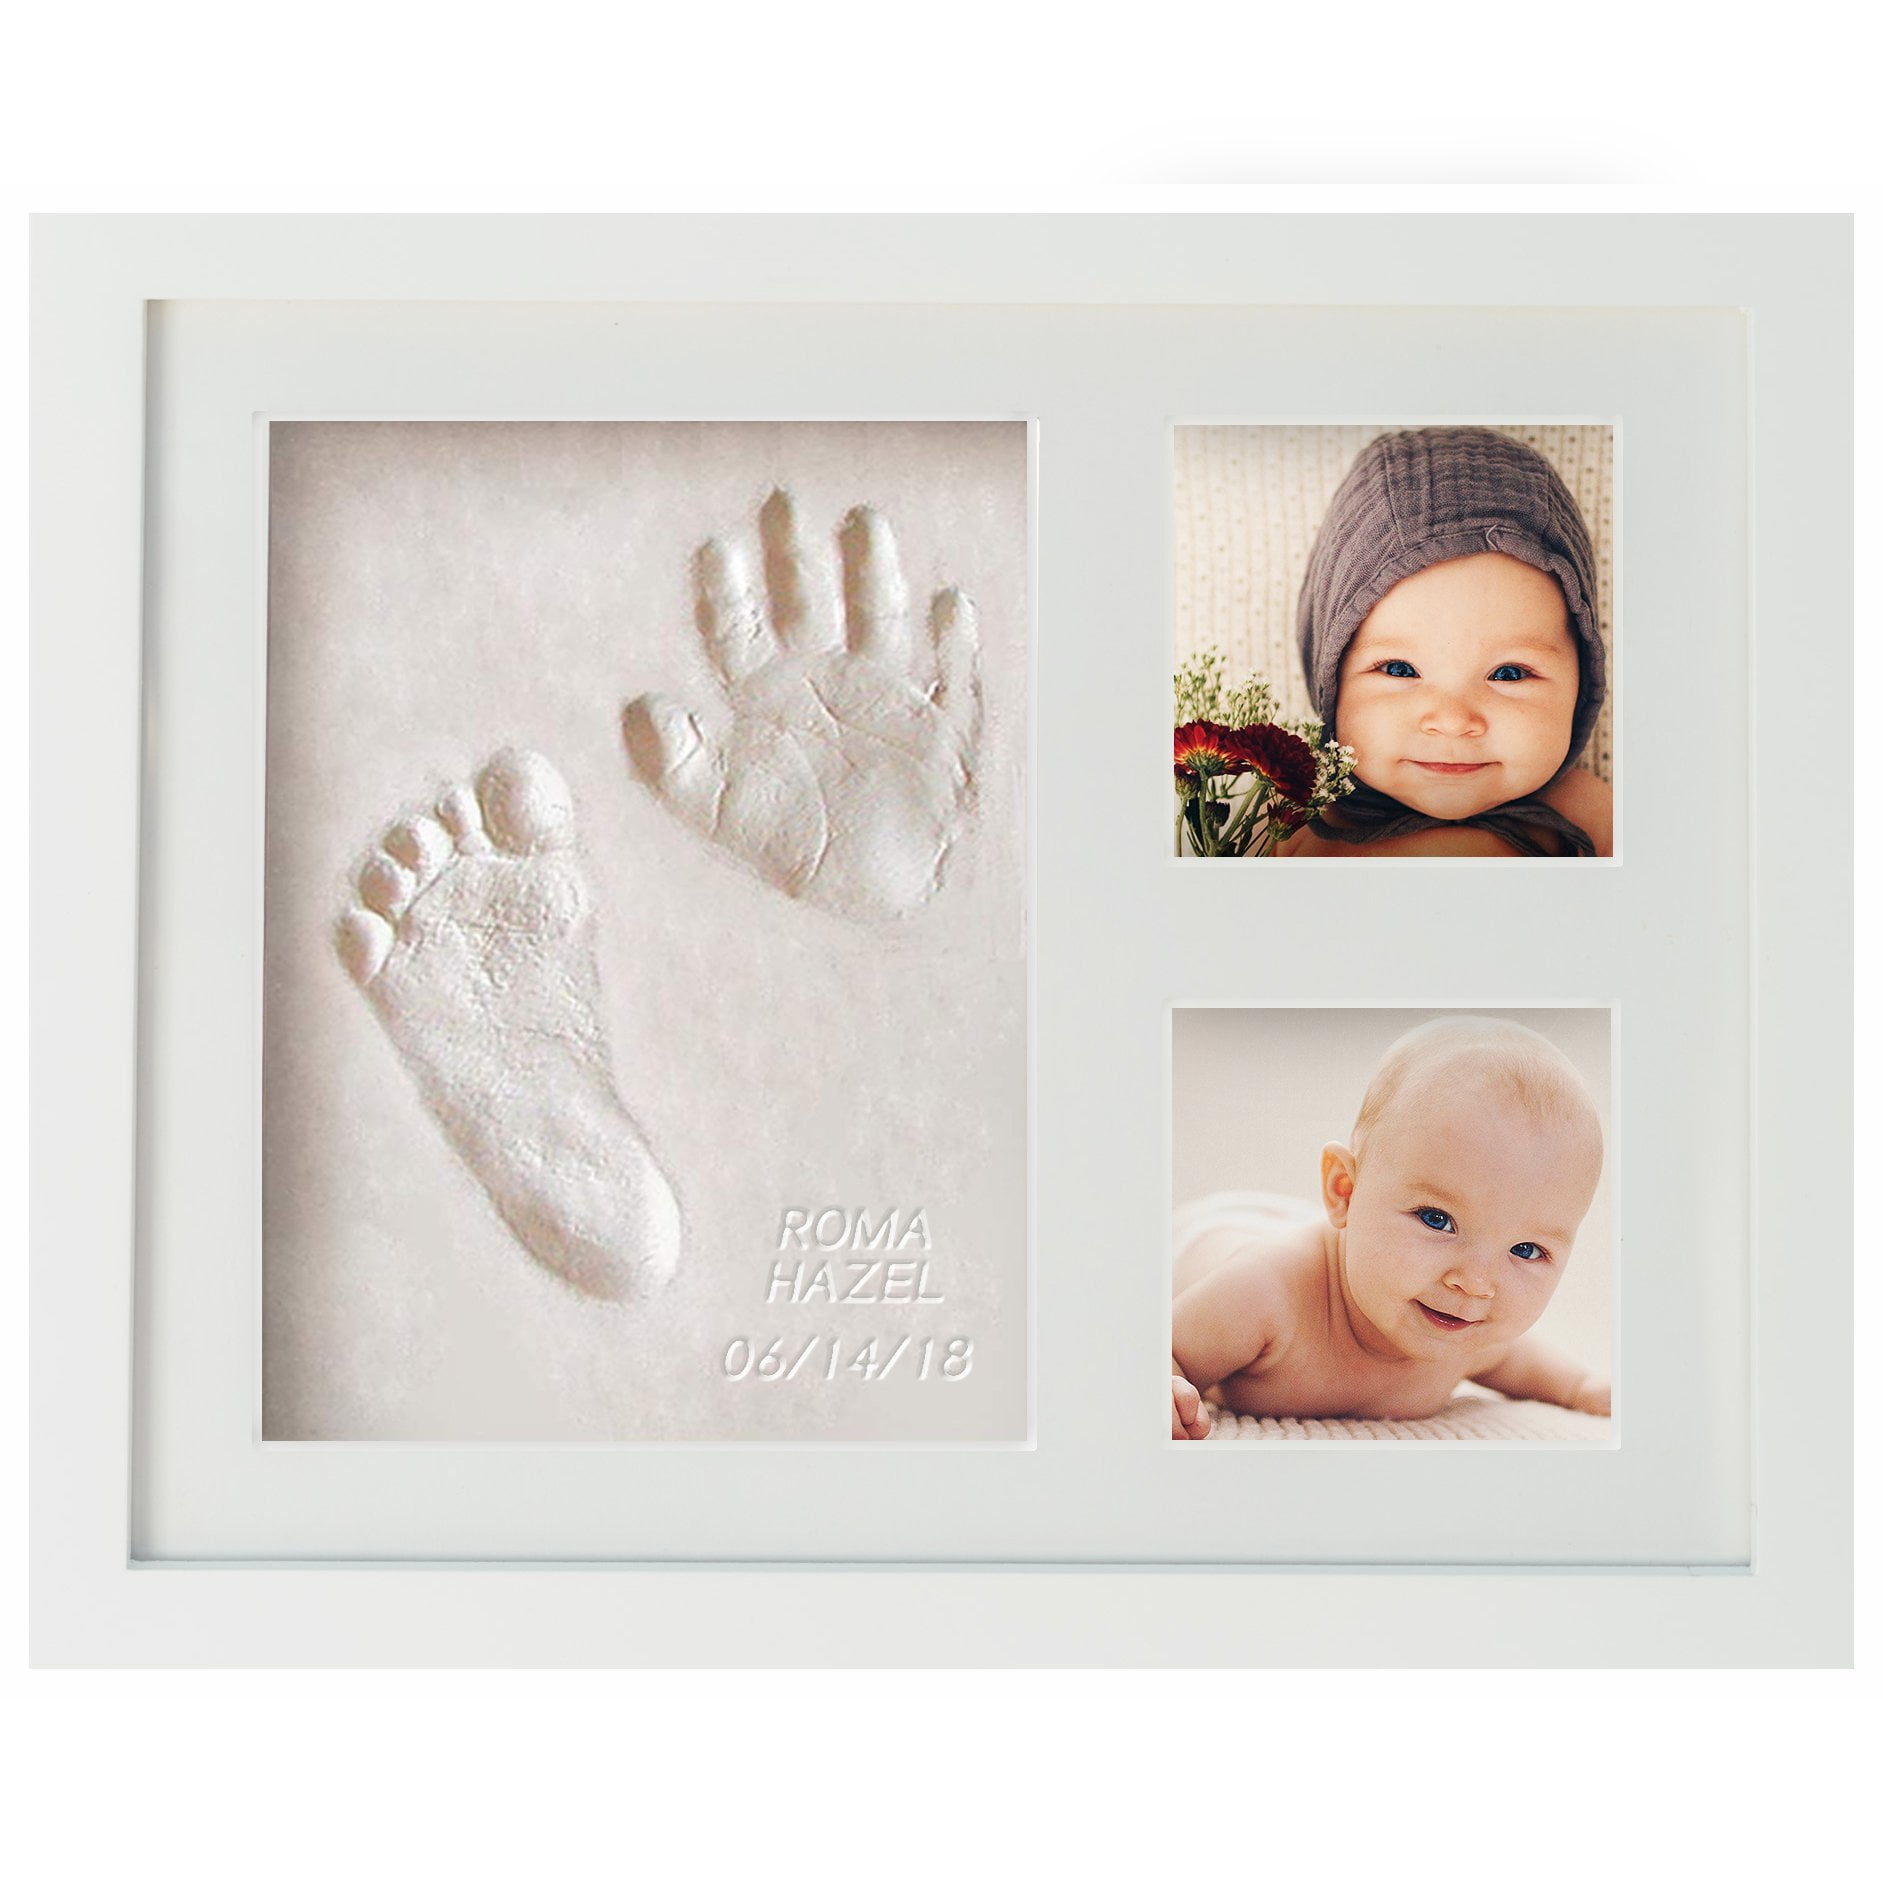 Quality Wood Frame with Safe Acrylic Glass Baby Keepsake Preserves Priceless Memories,Non Toxic and Safe Clay White Elsatsang Best Baby Handprint and Footprint Photo Frame Kit 